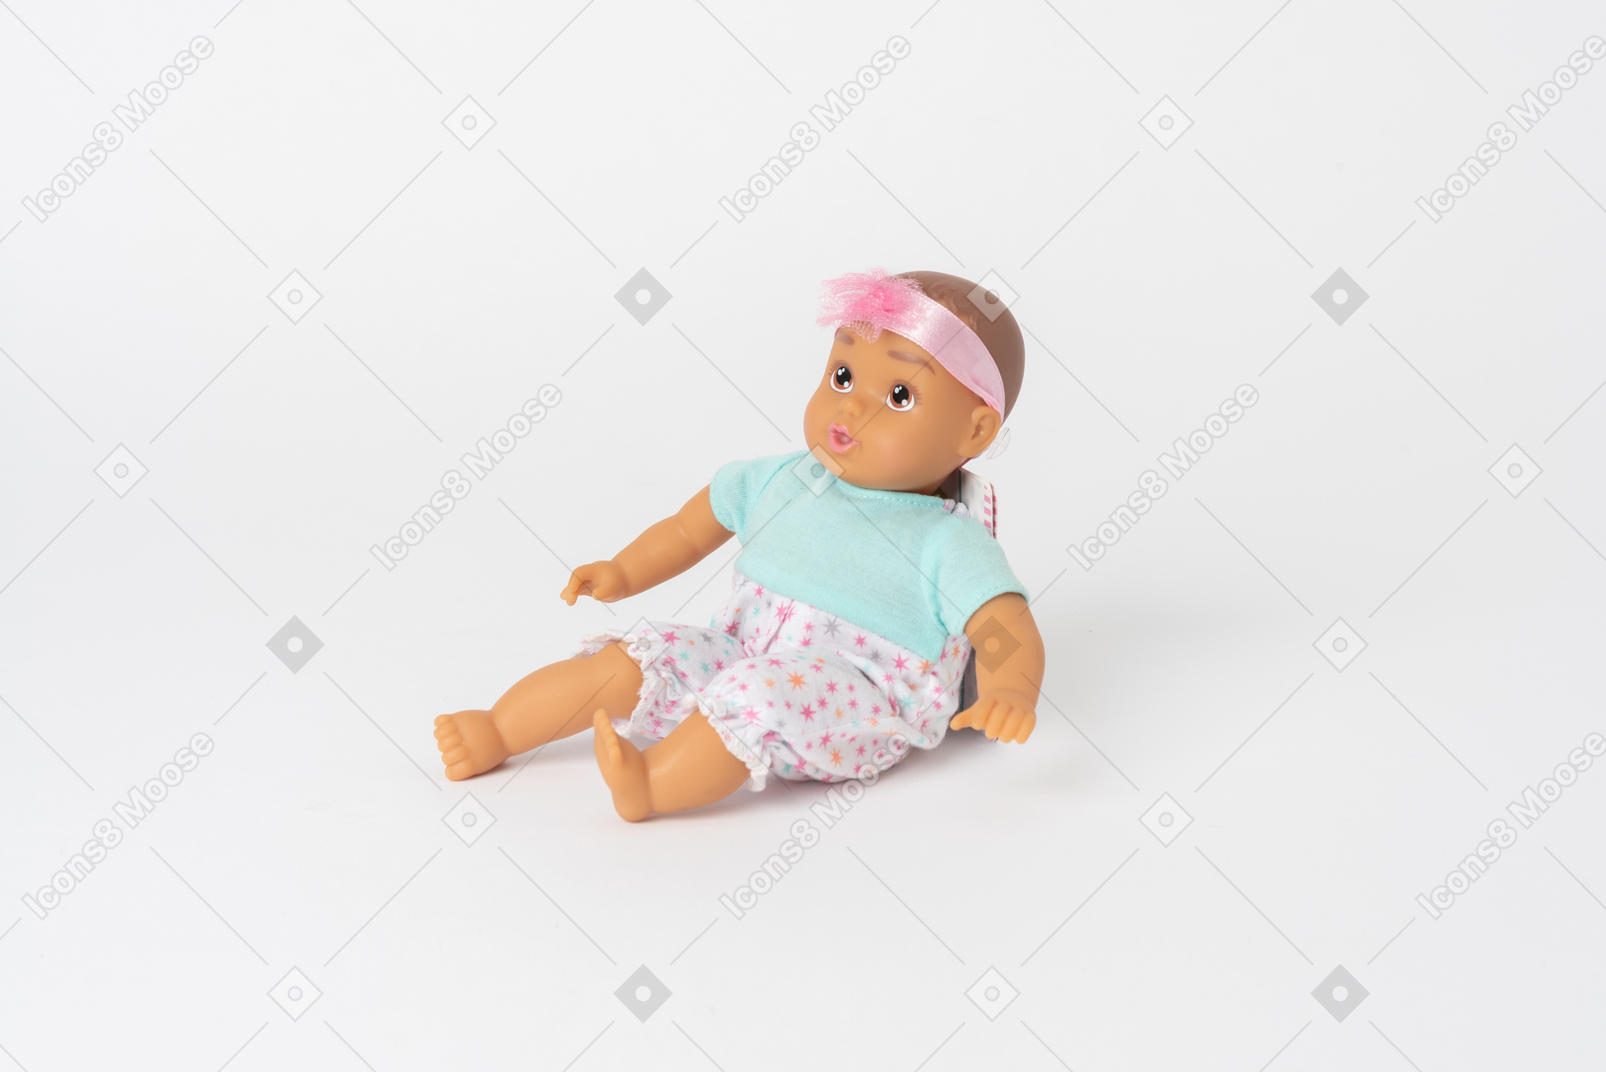 Cute baby doll sitting isolated on a plain white background